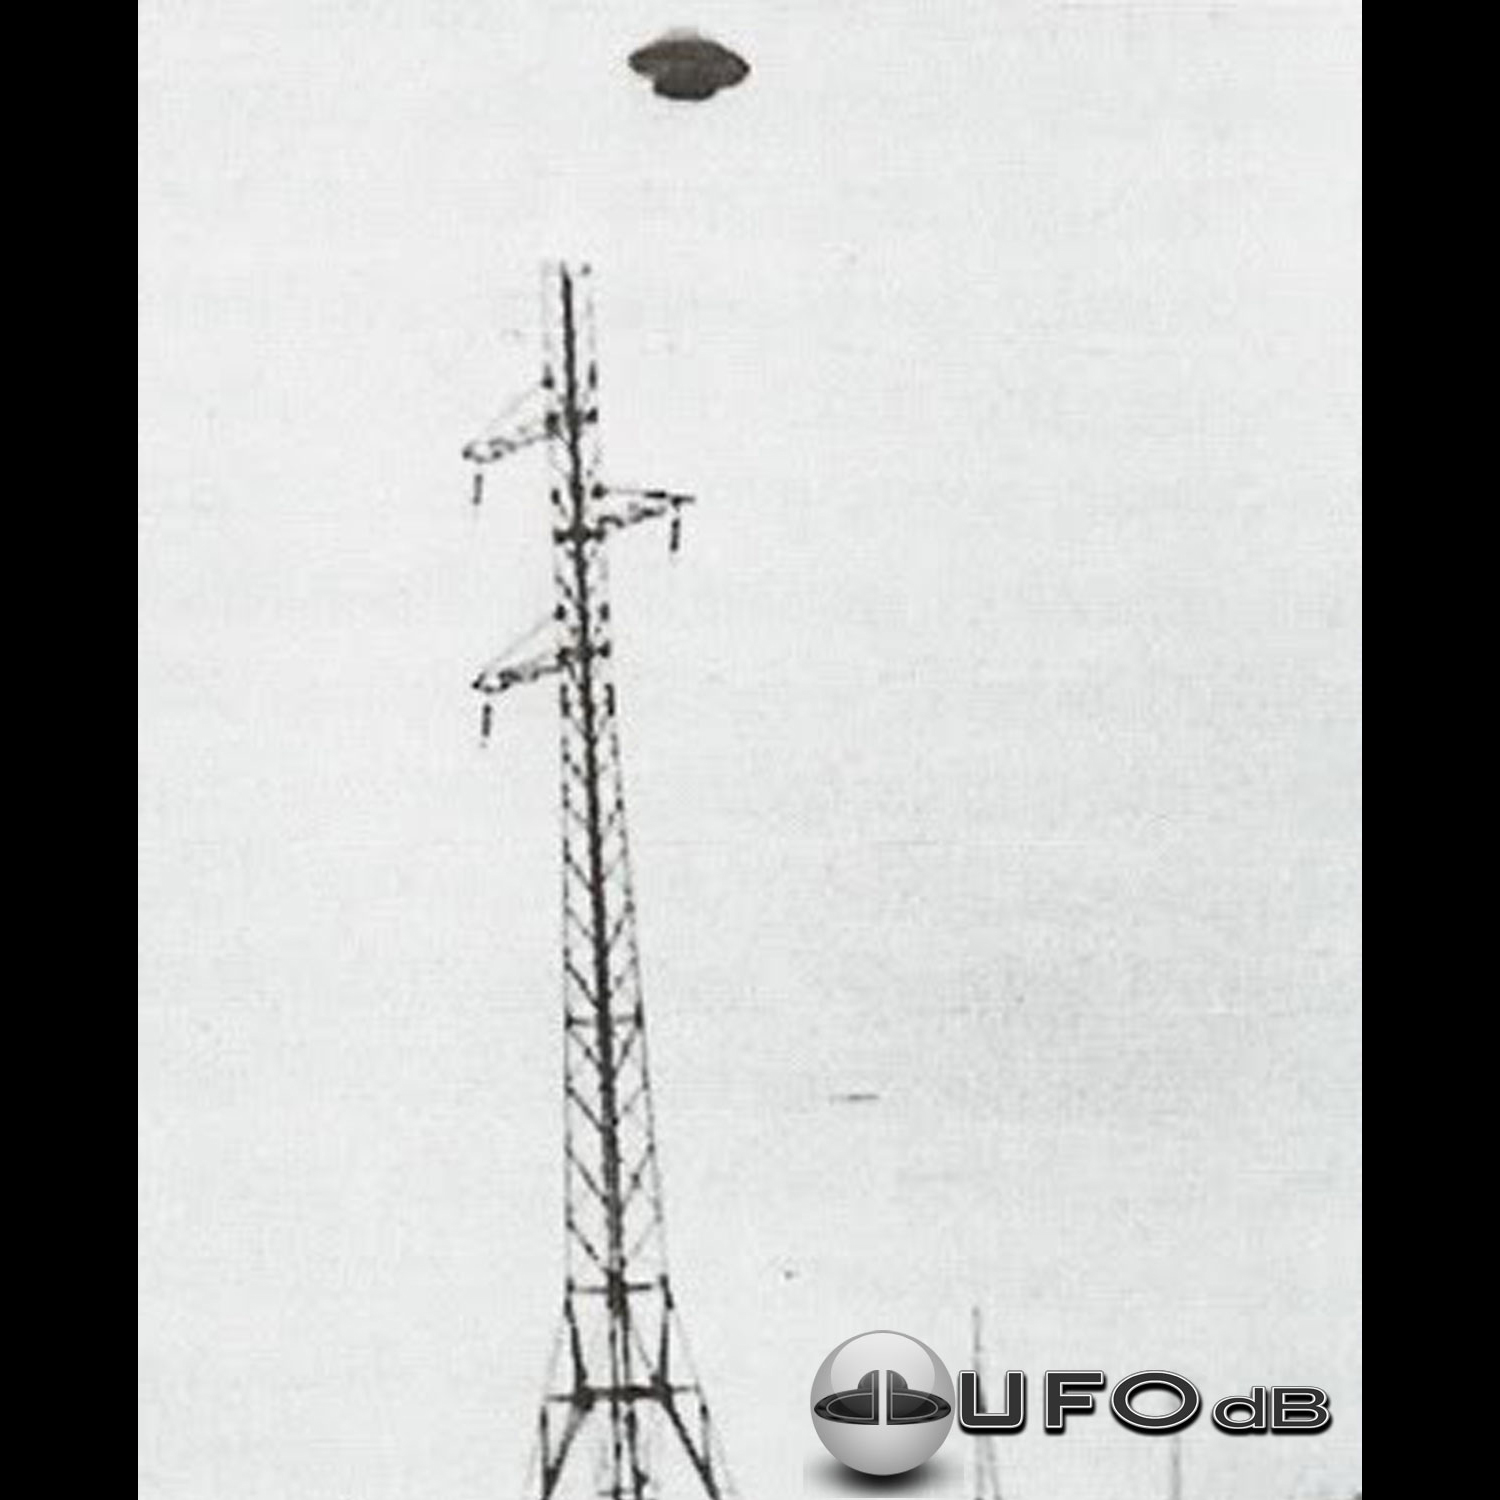 UFO muffin shape flying saucer standing over electrical stucture UFO Picture #46-1